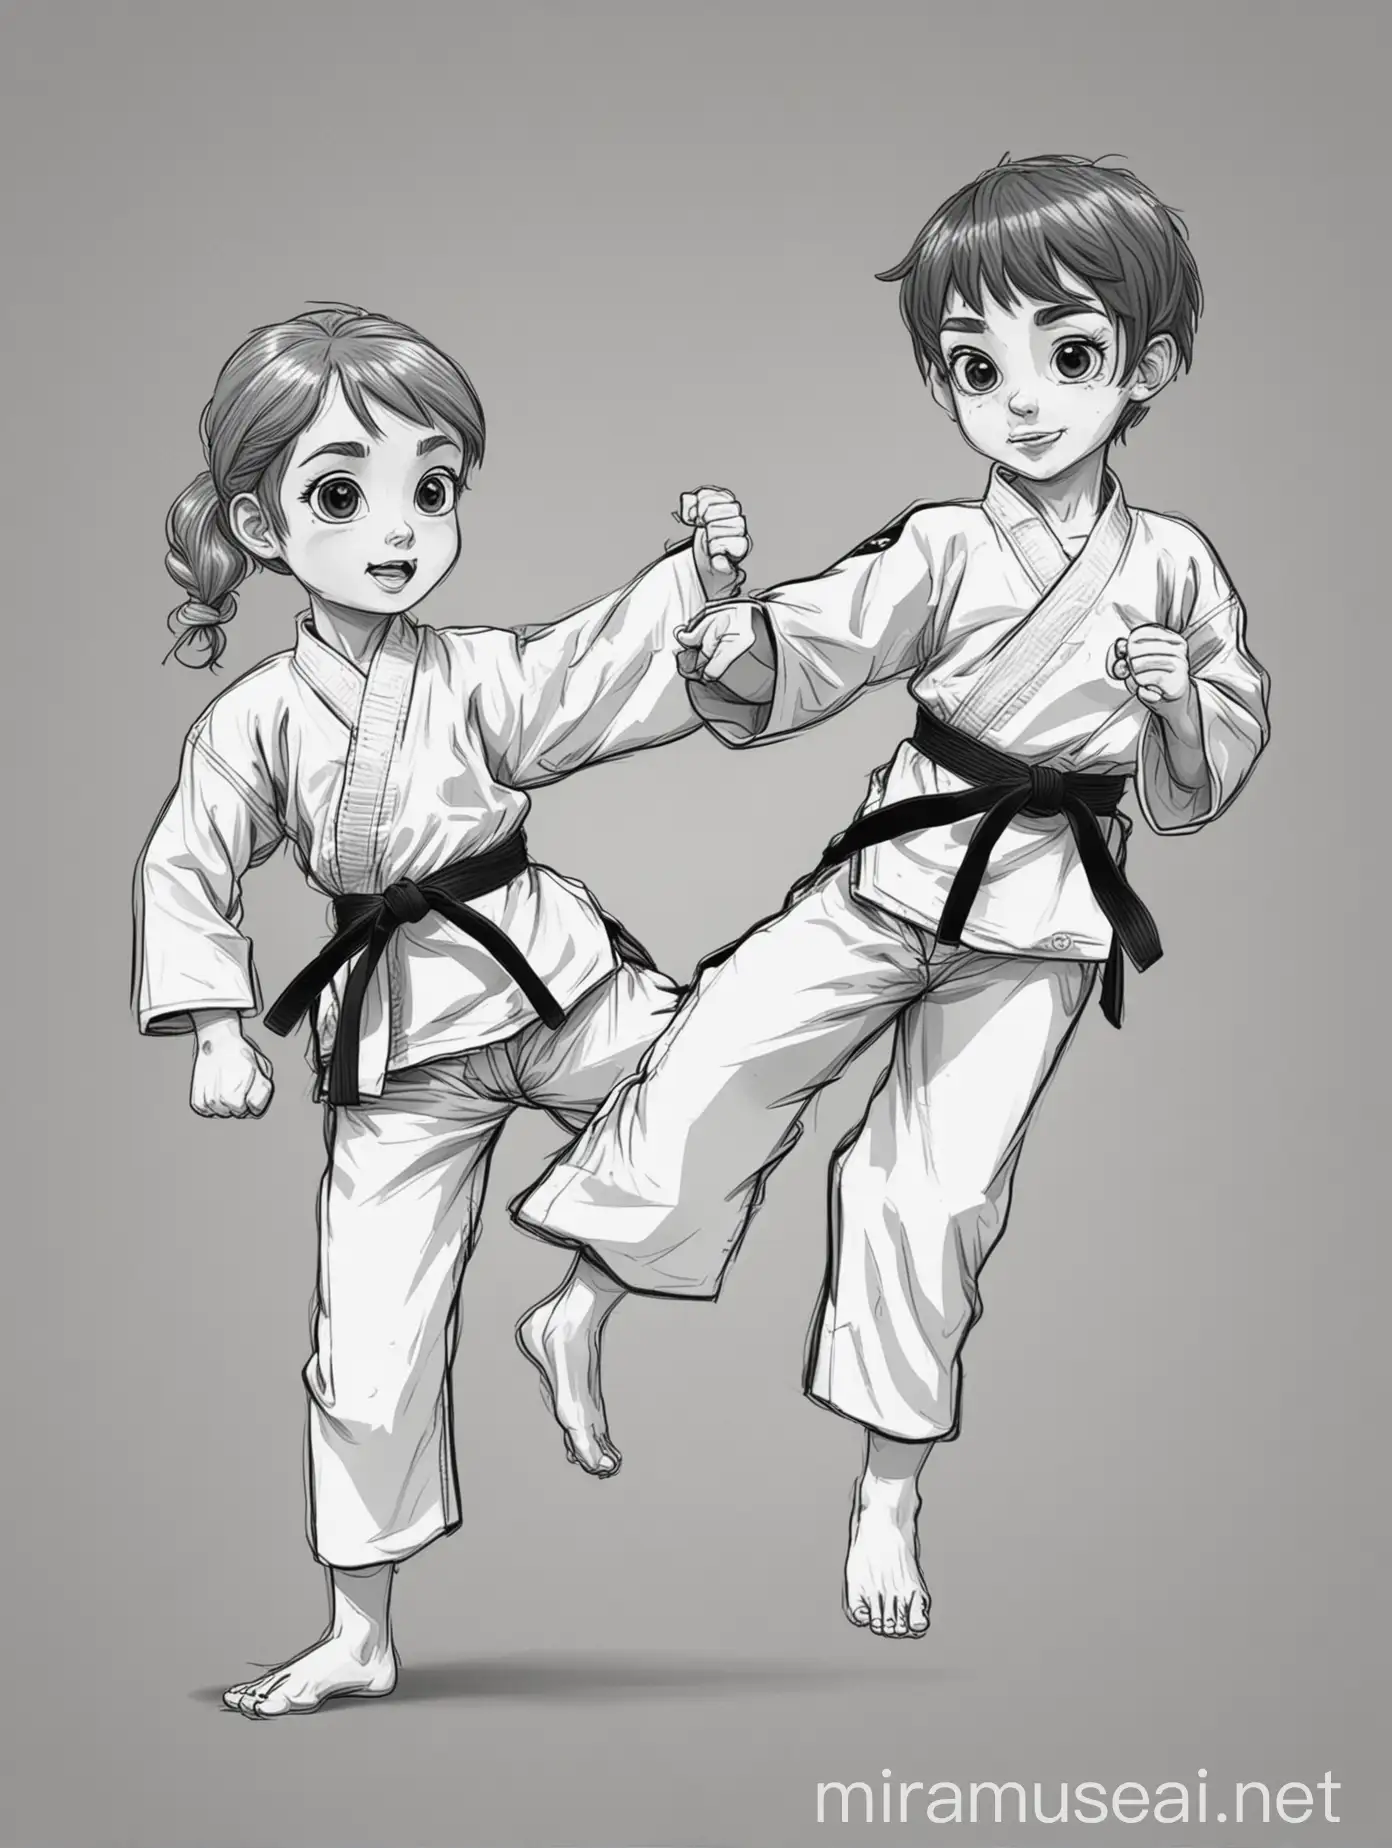 Karate Boy and Girl Practicing Kicking and Blocking in Karate Suits